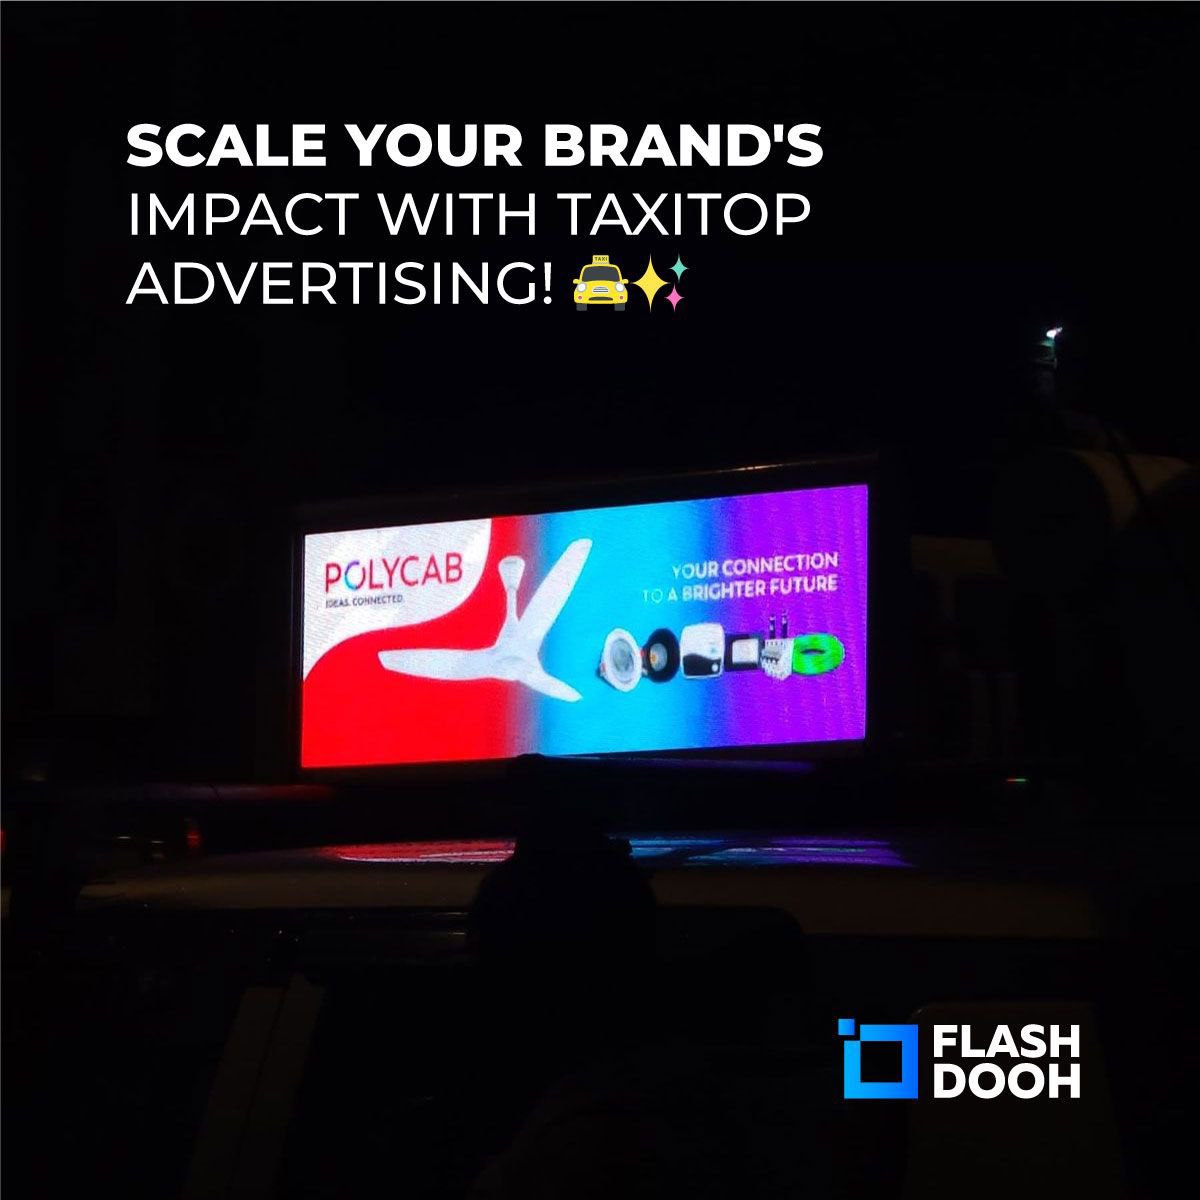 Reach your audience with precision and scale your brand's impact with FlashDOOH.

Visit flashdooh.com 

Write to us on hello@flashdooh.com

#TaxitopAdvertising #BrandImpact #FlashDOOH #TargetedCampaigns  #mumbaiads #mediaplanning #digitaladvertising #taxitopmedia